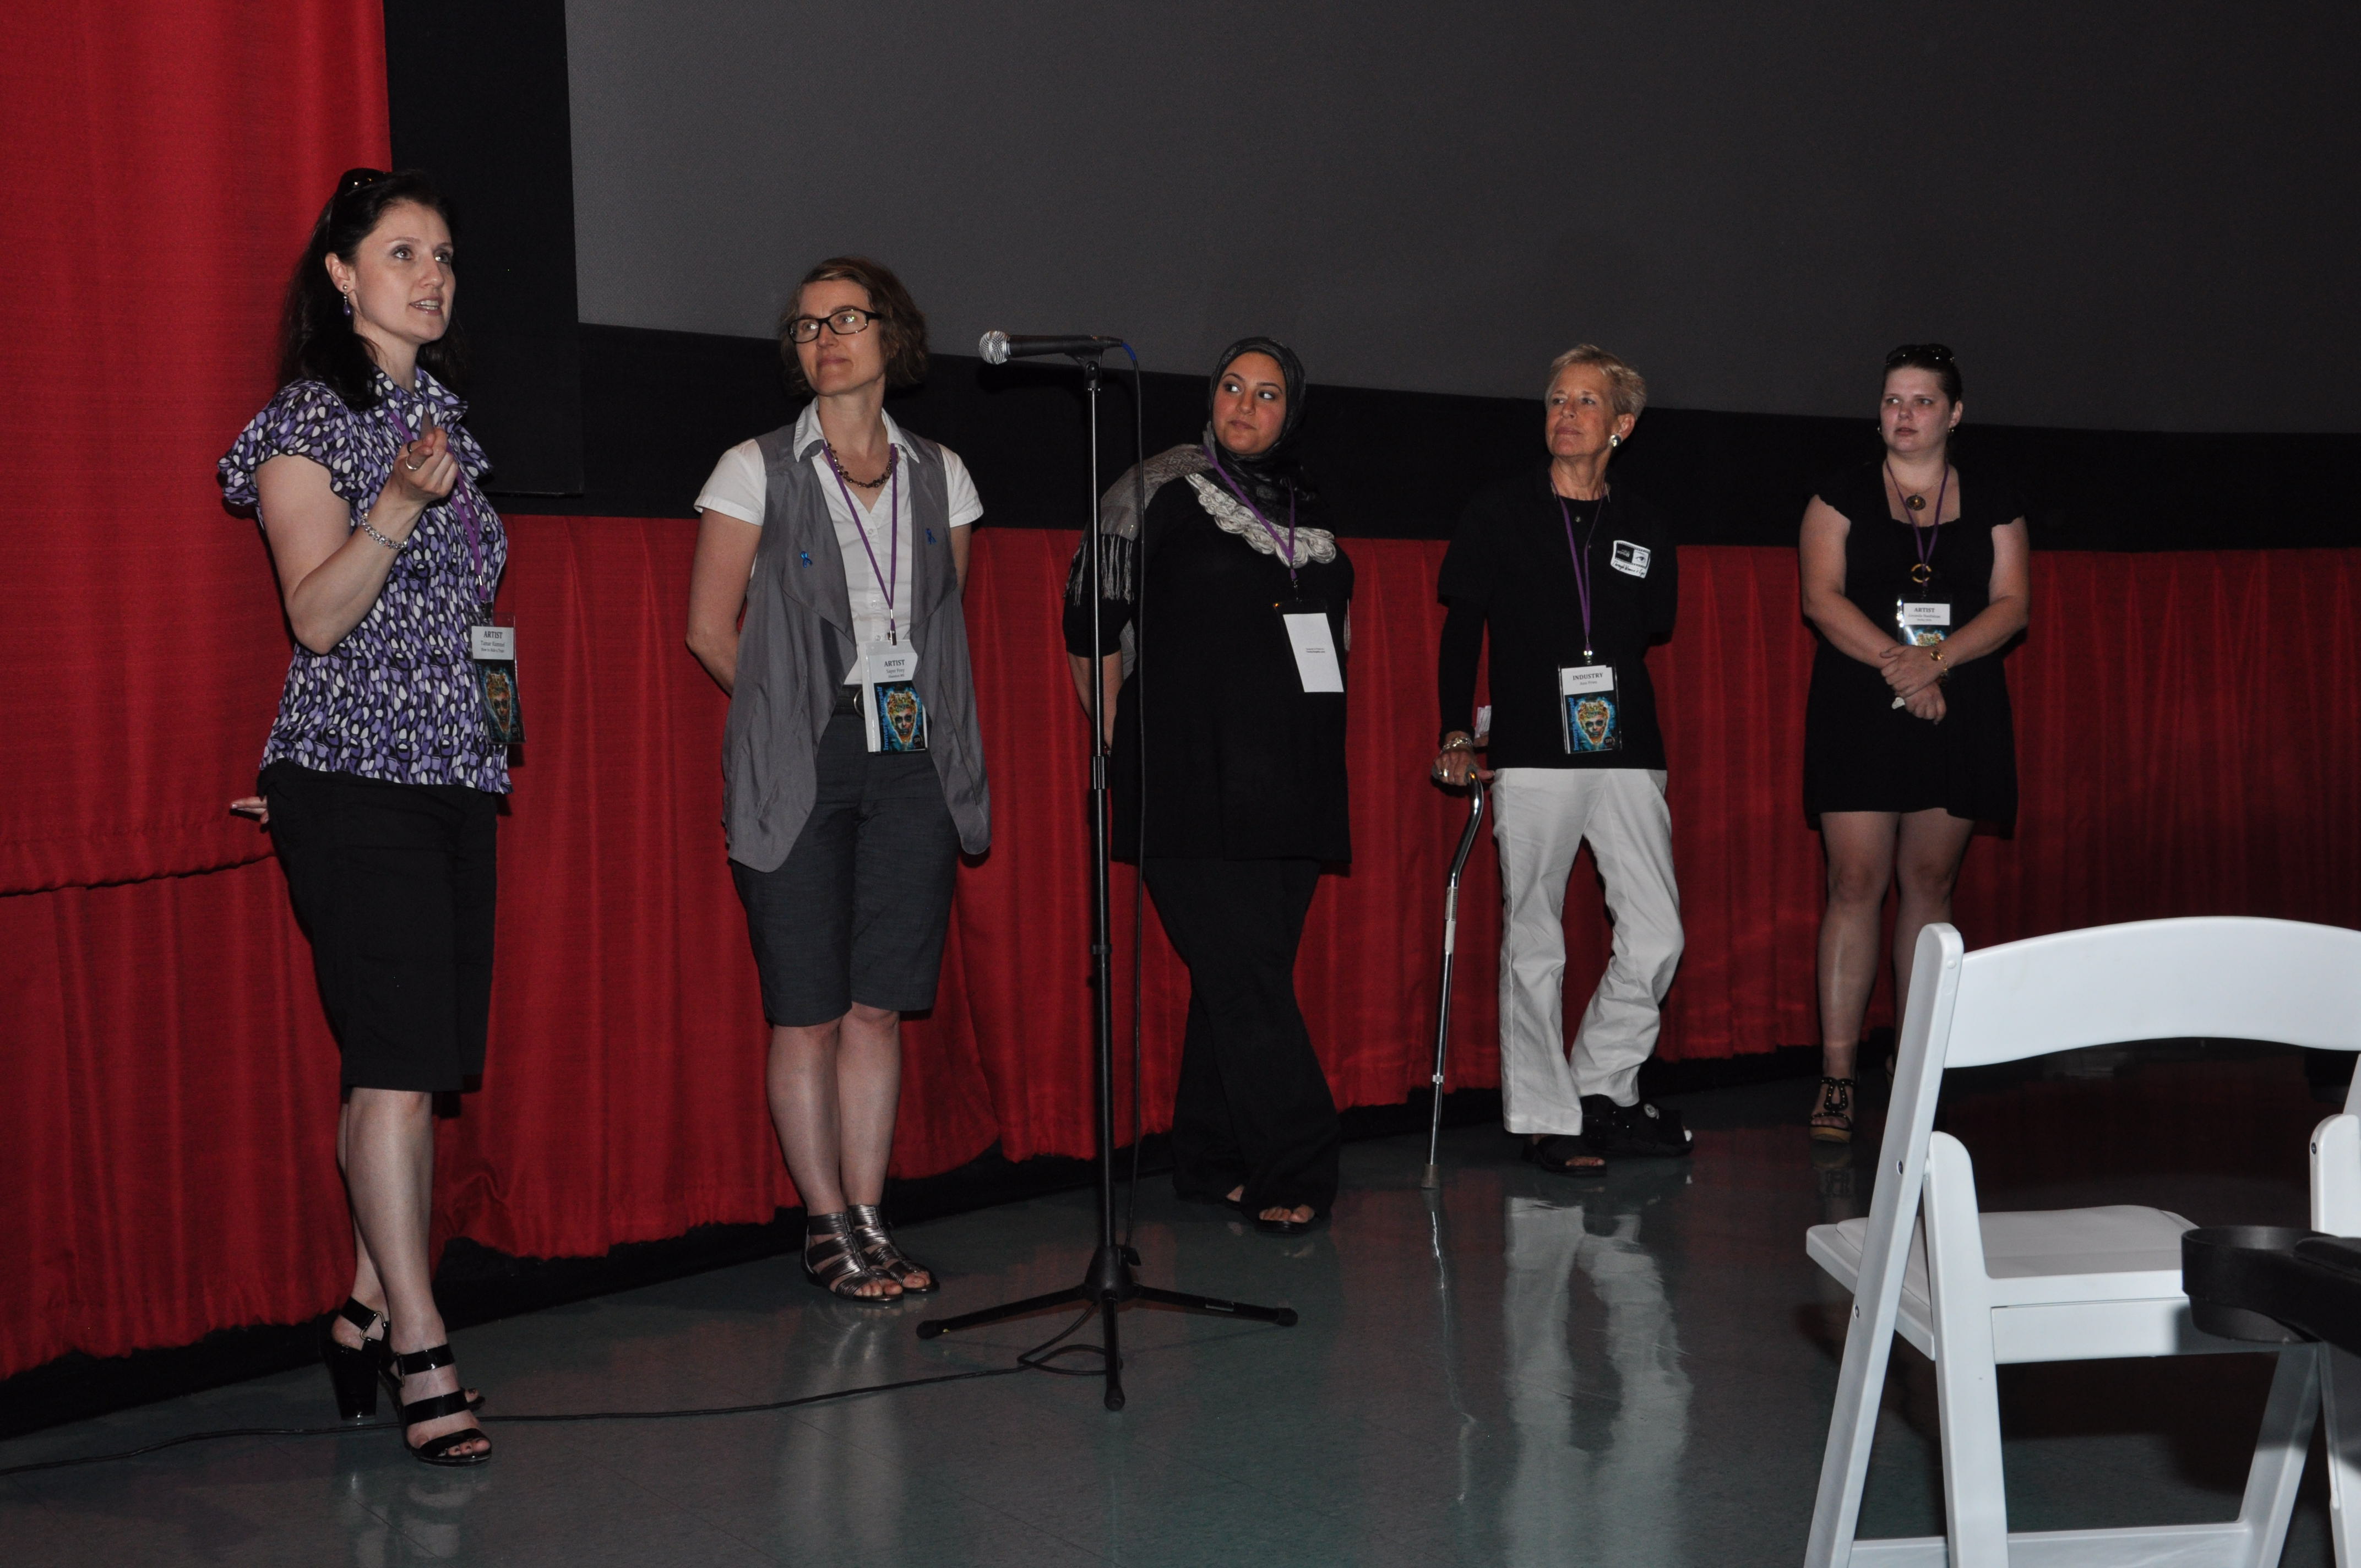 Q and A after the Through Women's Eyes short film screenings at the Sarasota Film Festival (for the film, 